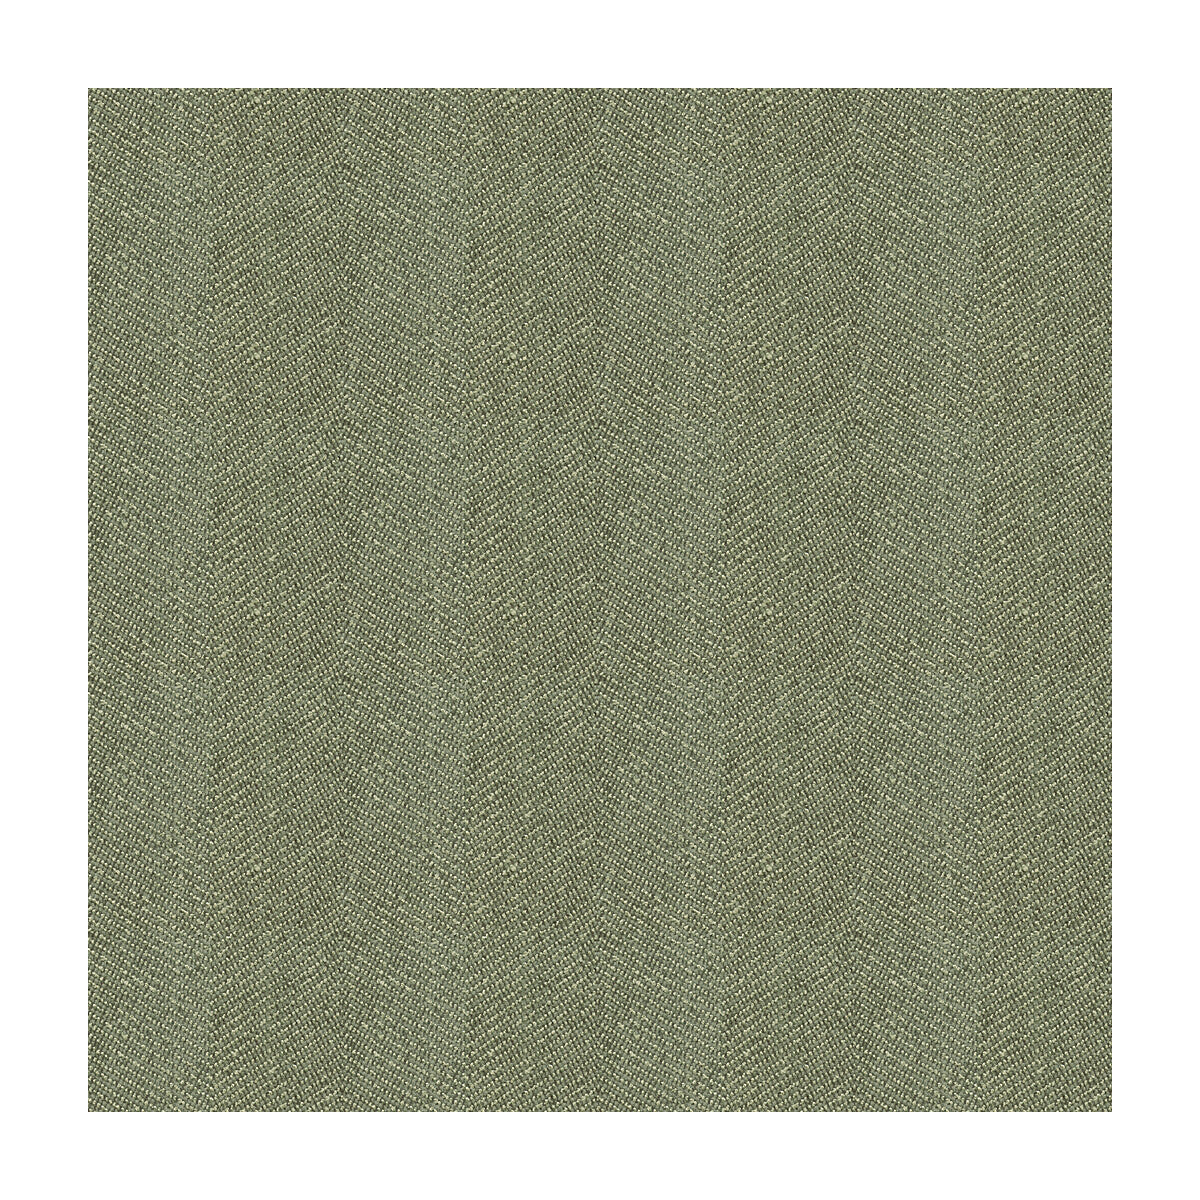 Kravet Smart fabric in 33832-1121 color - pattern 33832.1121.0 - by Kravet Smart in the Performance Crypton Home collection